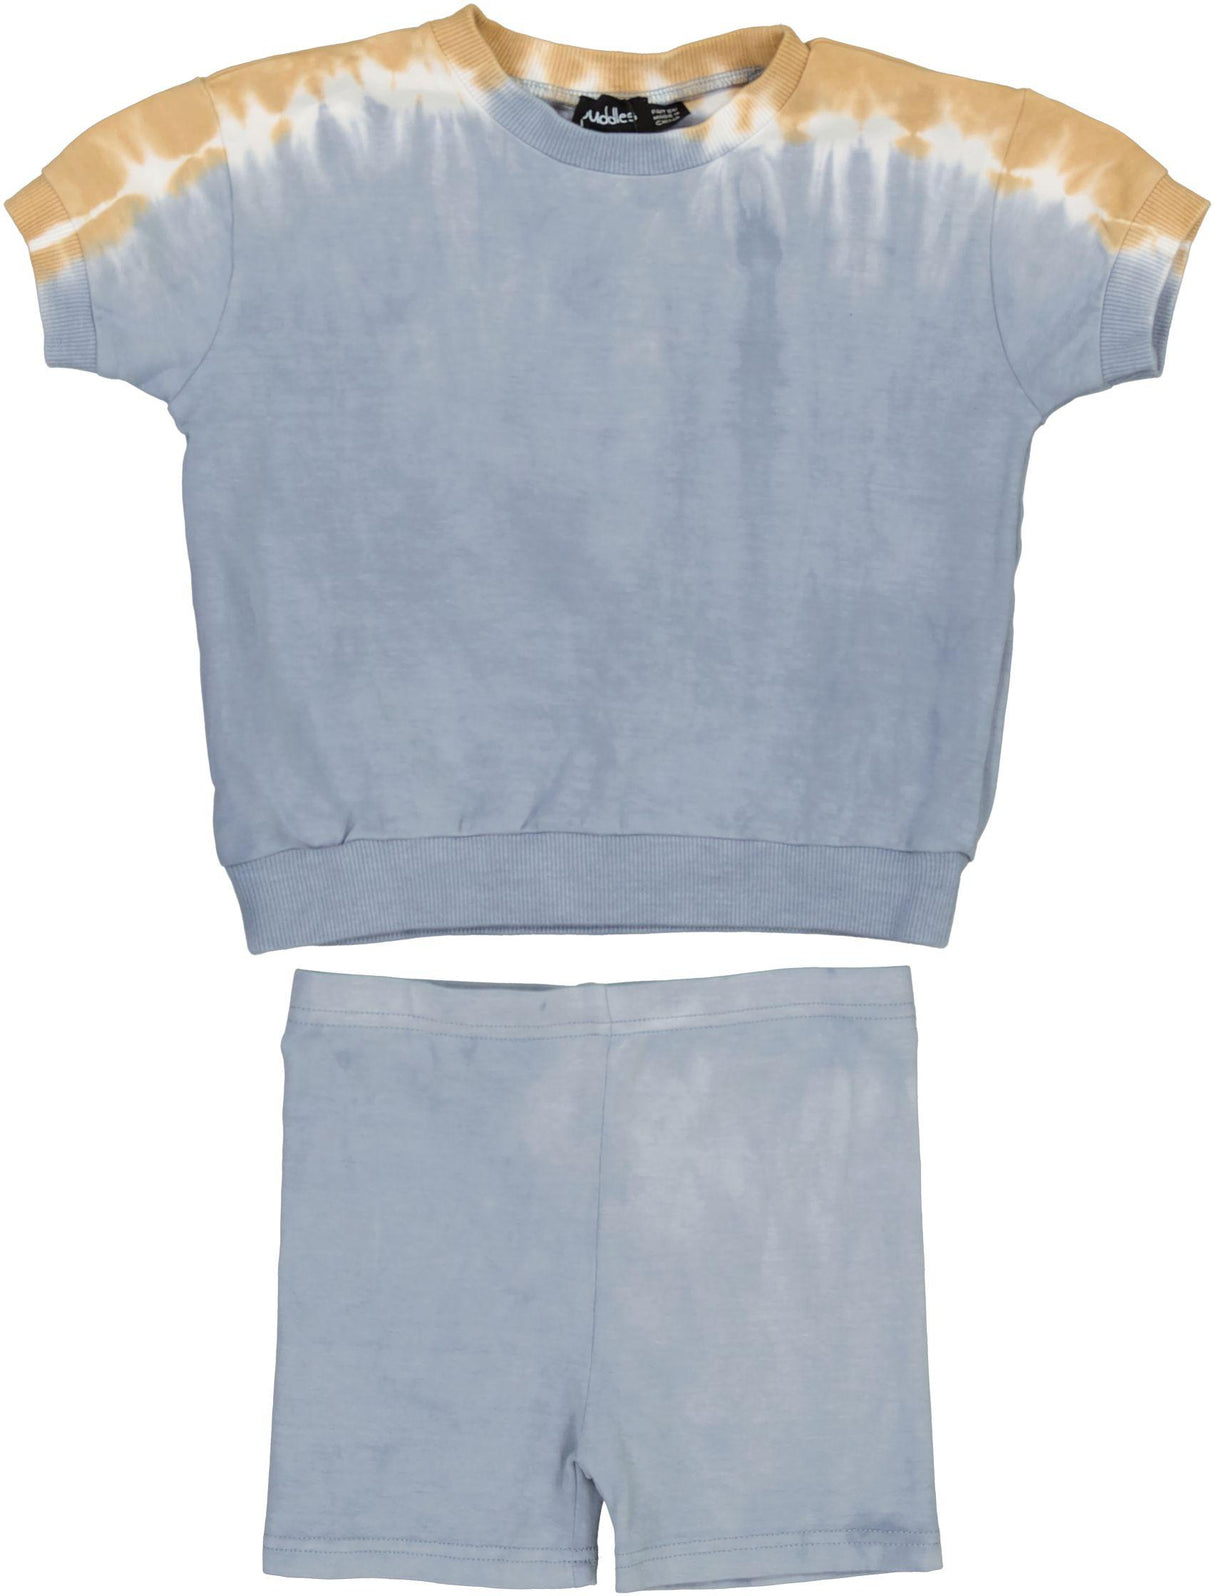 Puddles Baby Boys Tie Dye Outfit - SB4CY2366EB